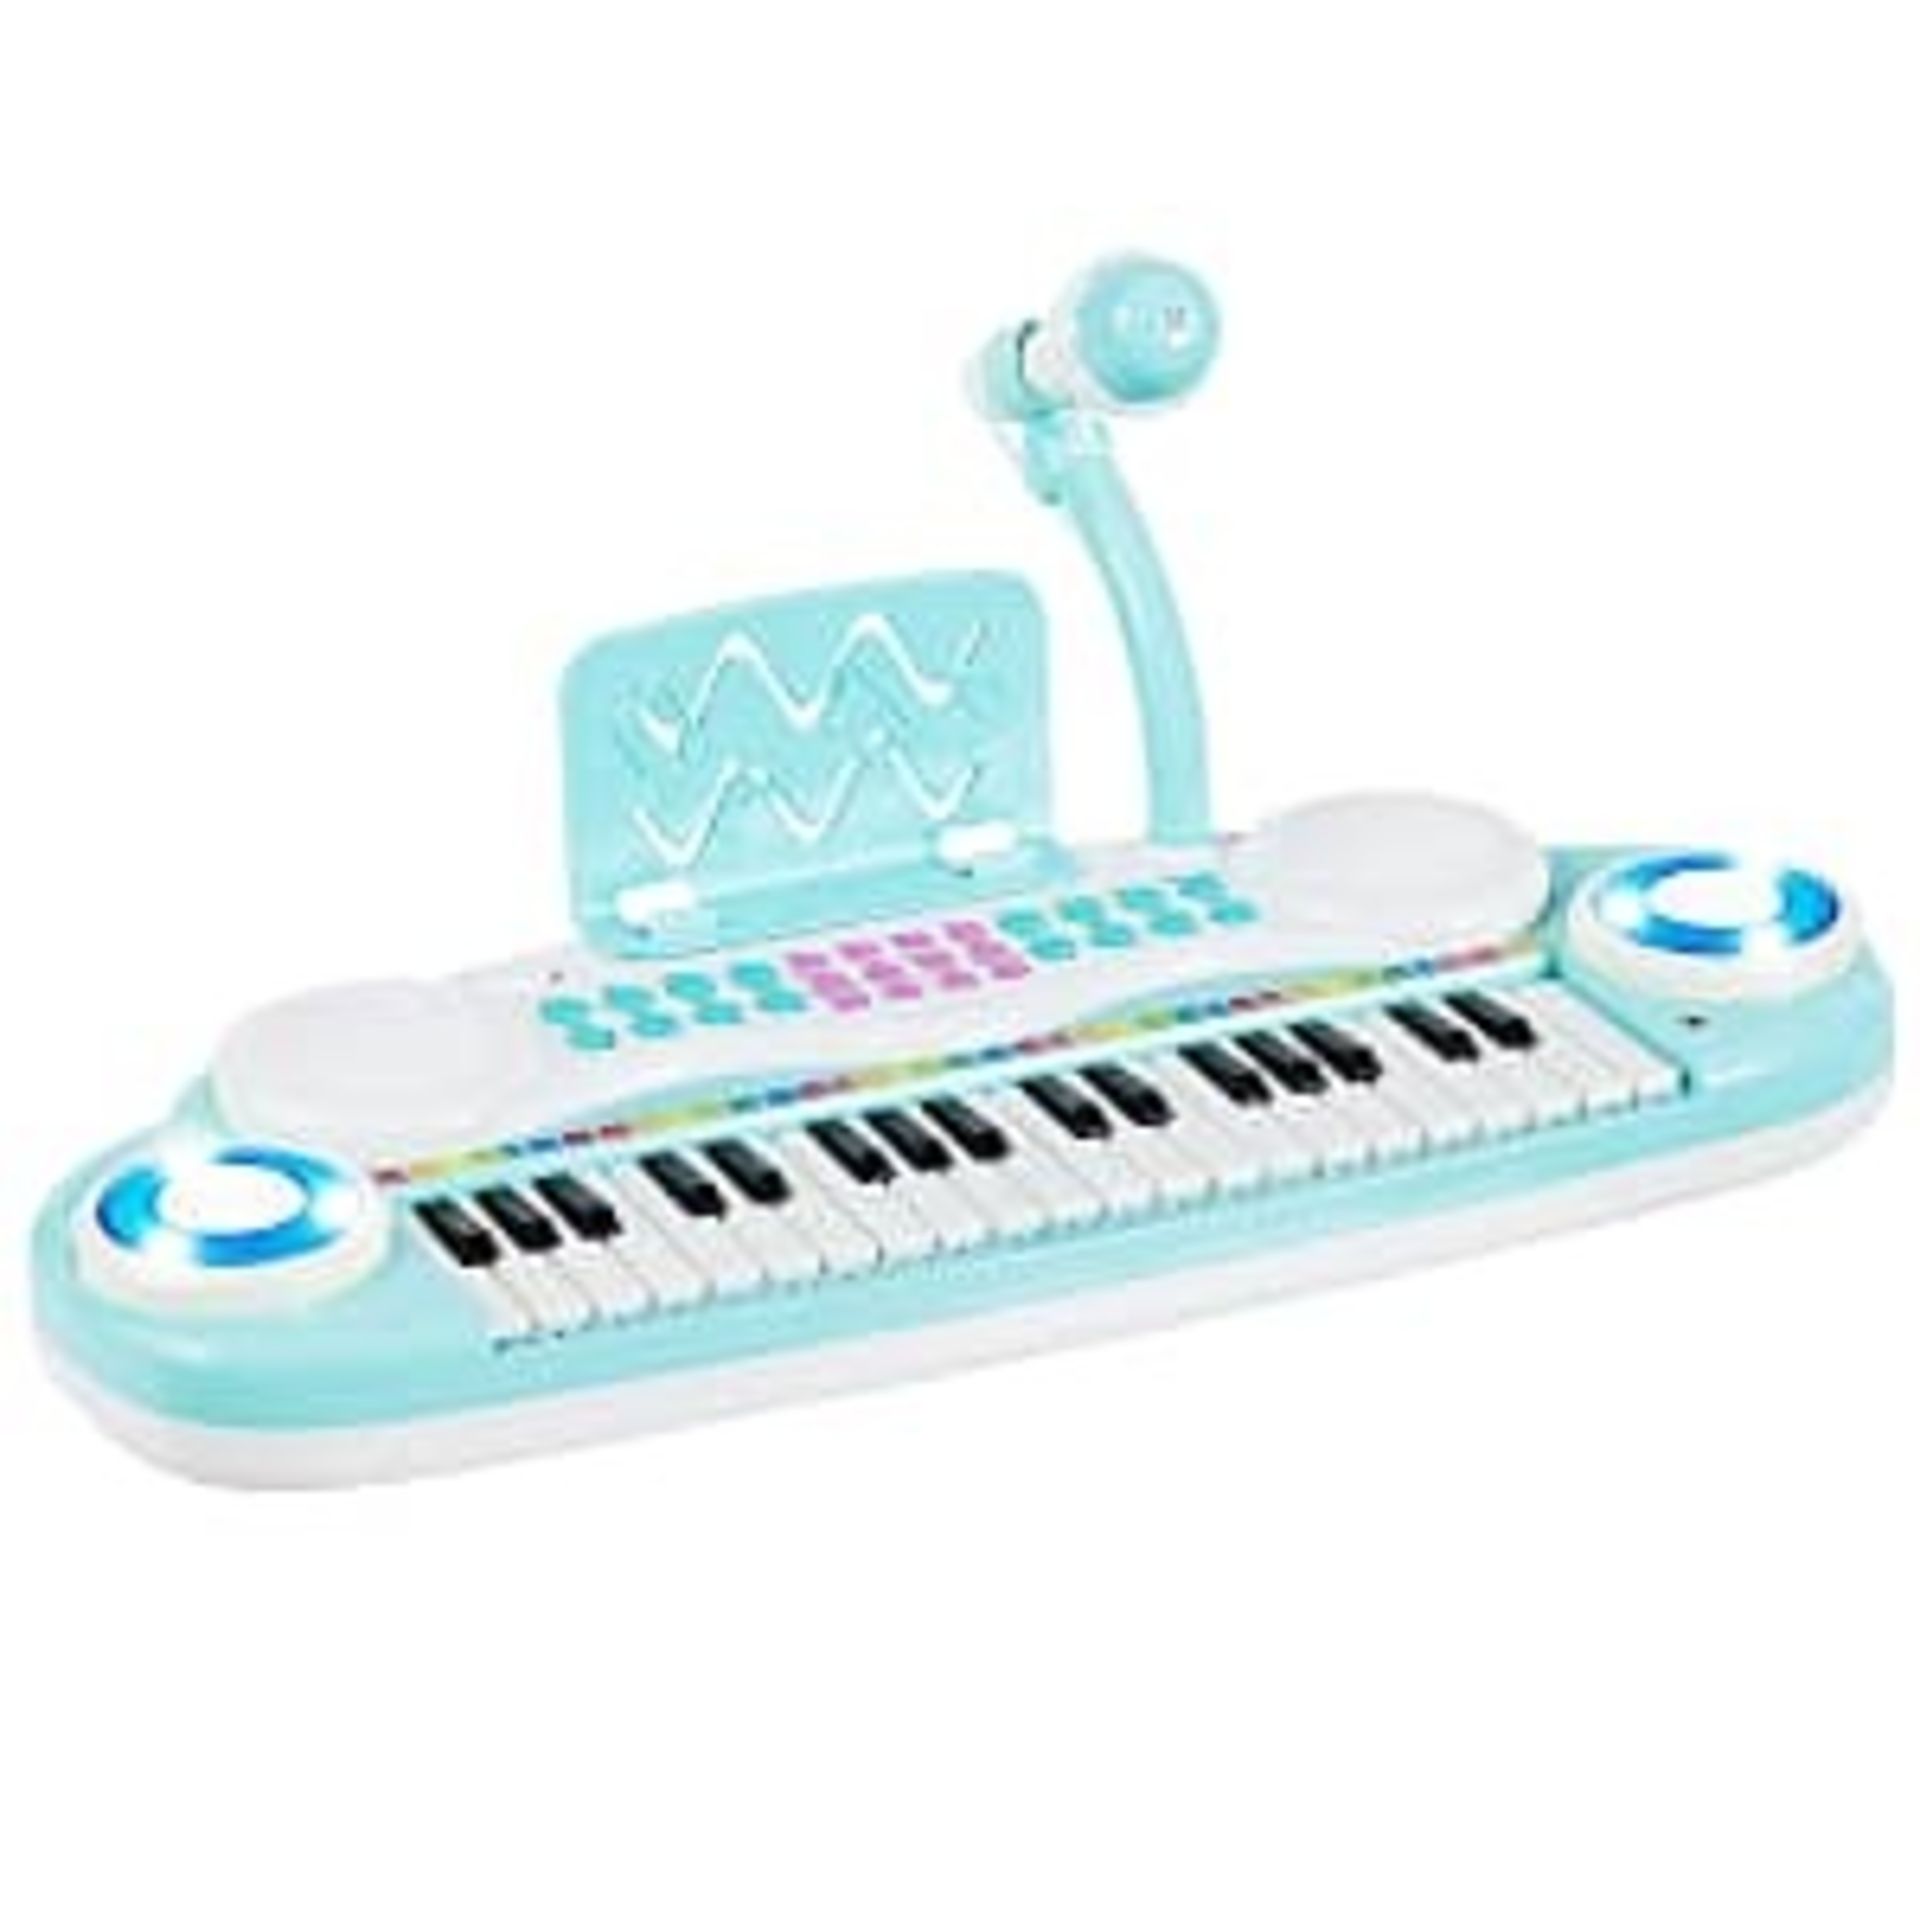 Portable 88-Key Roll Up Electronic Piano for Kids - ER53 *Design may vary